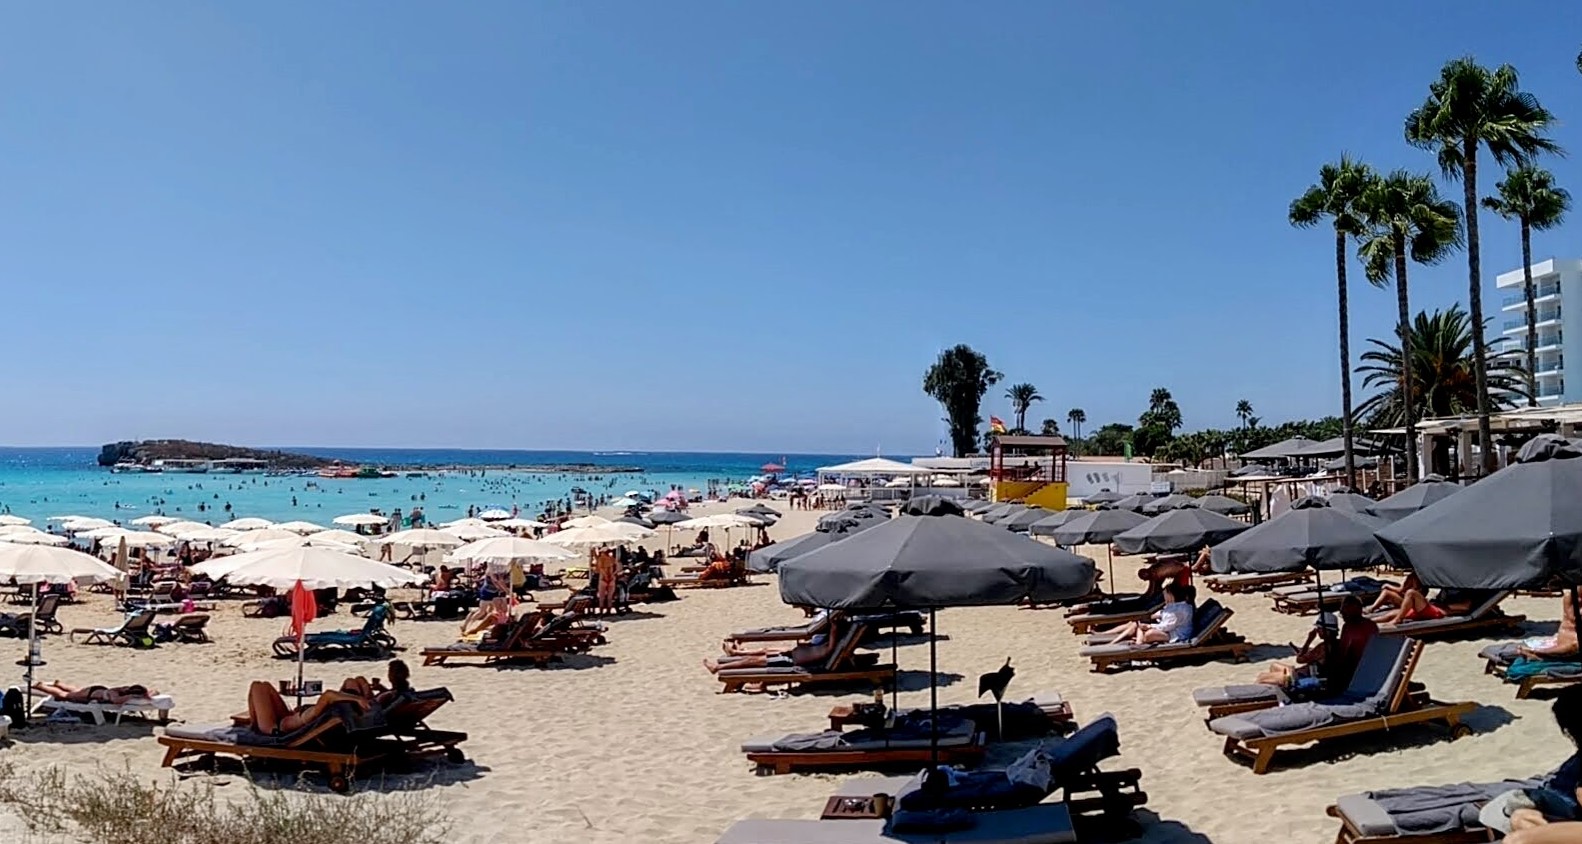 Cyprus tourism dented by rising costs, shorter stays — winter product missing